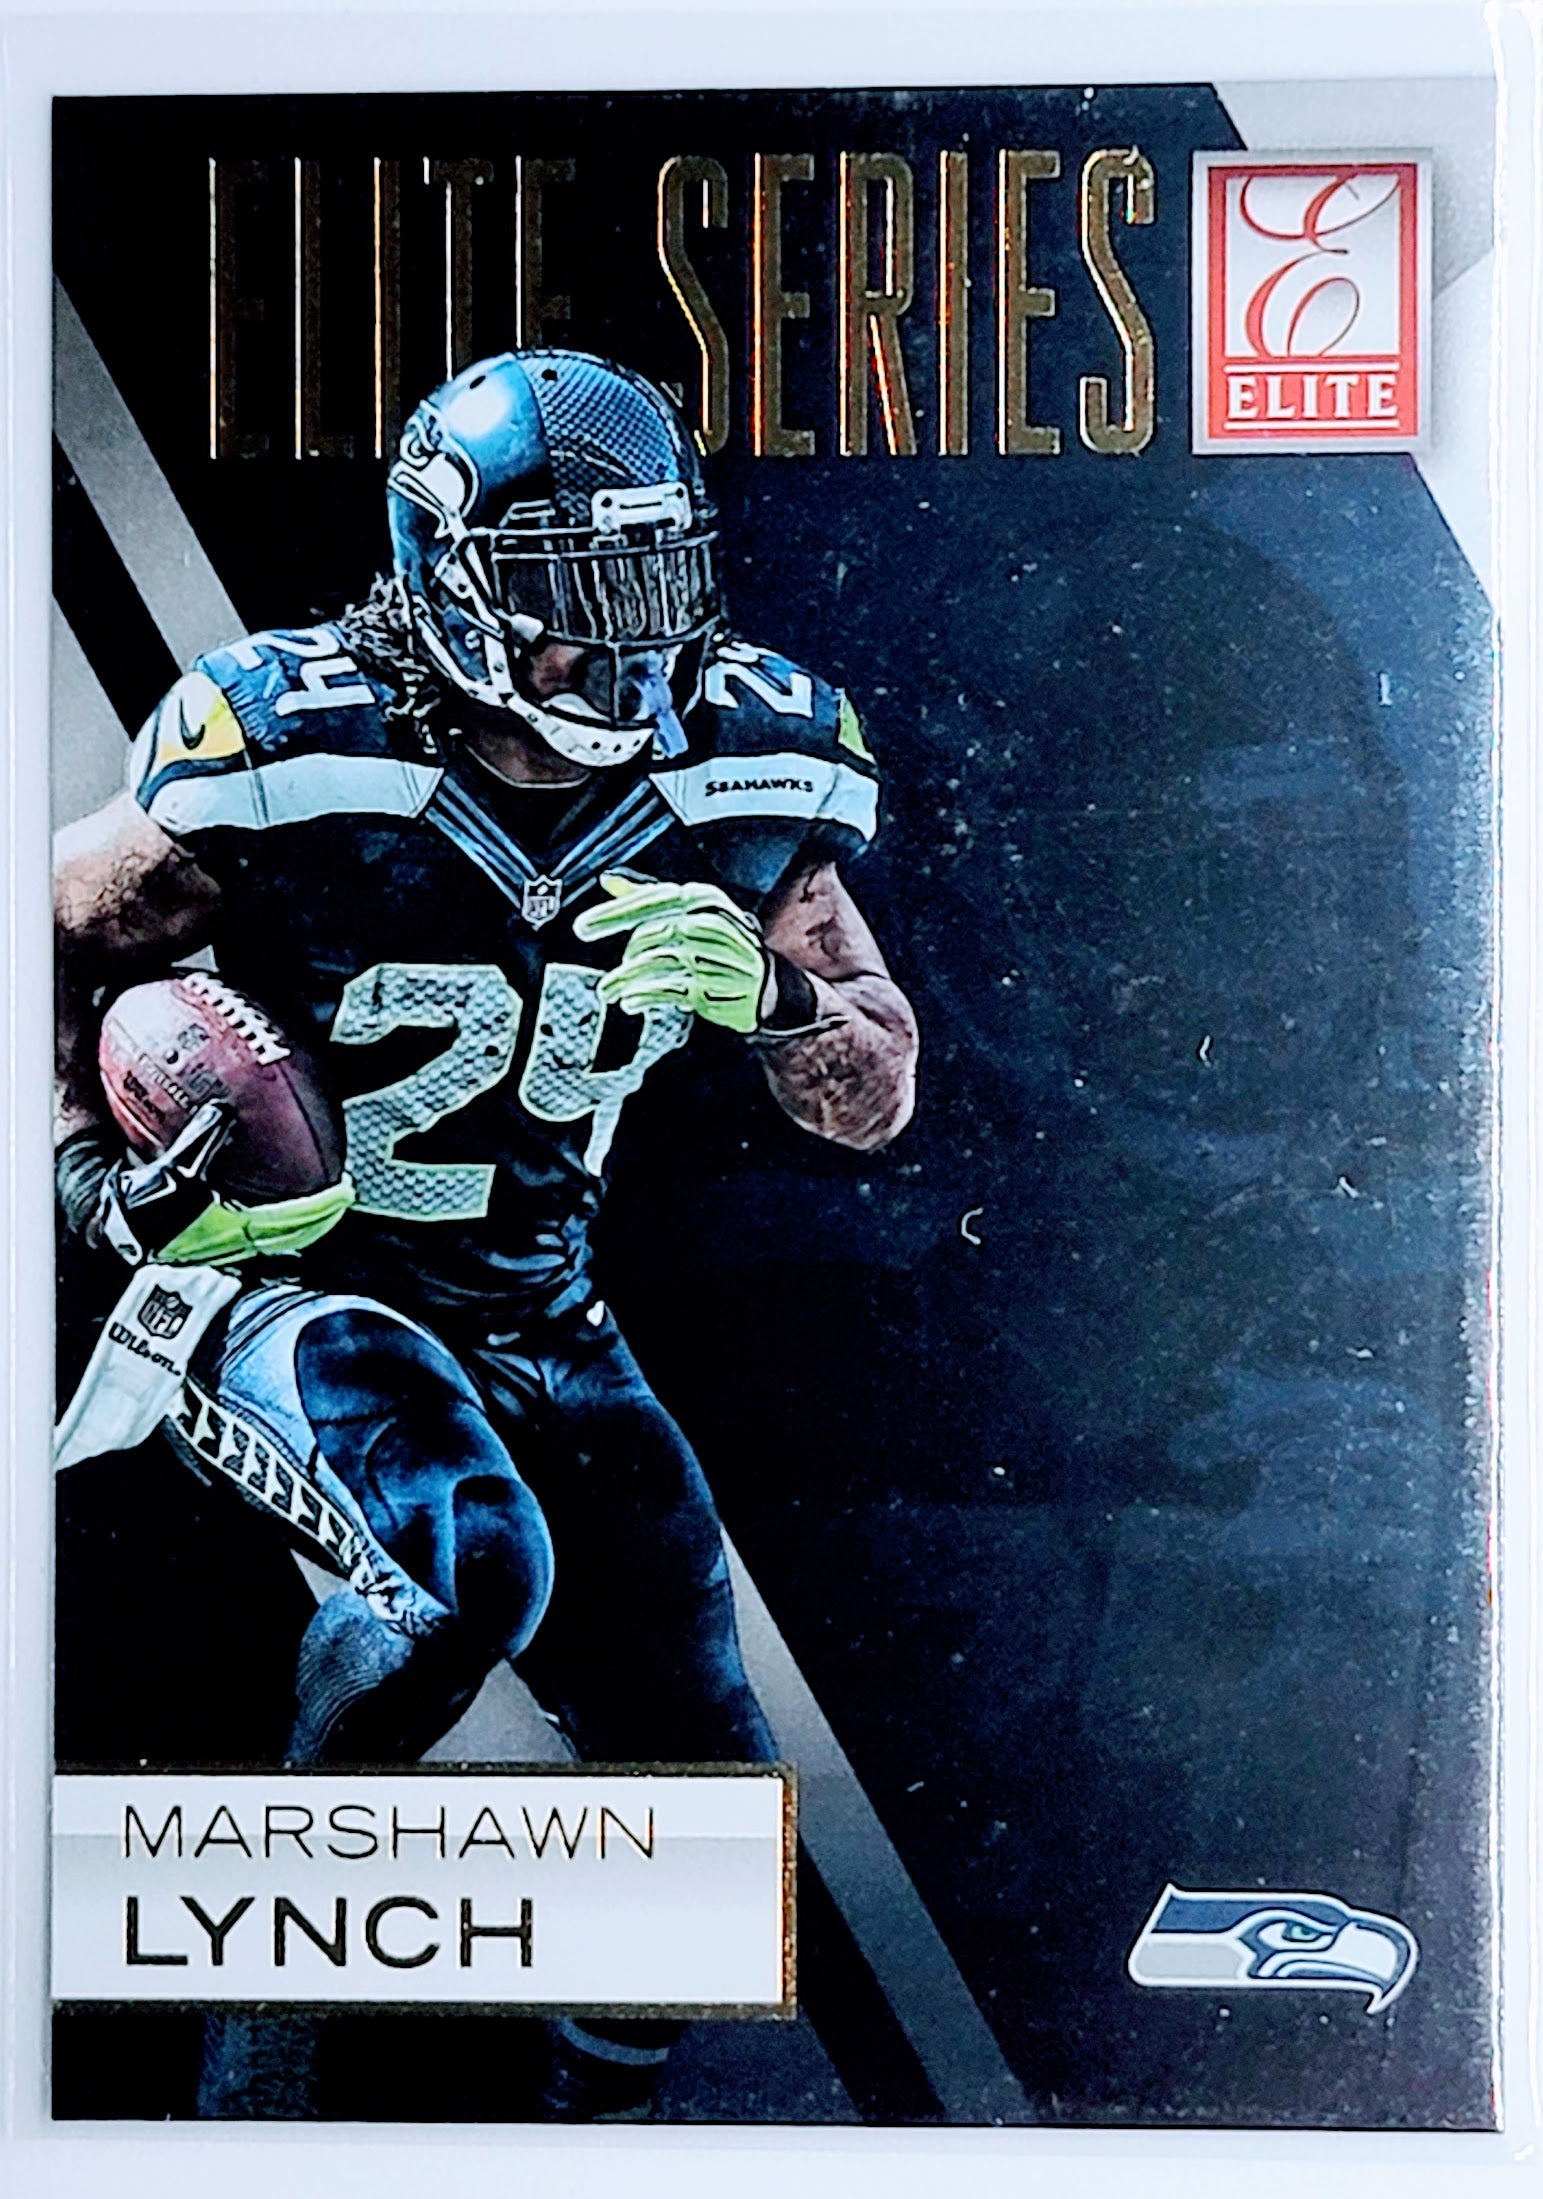 2015 Donruss Marshawn Lynch
  Elite Series  Seattle Seahawks Football
  Card  TH1CB simple Xclusive Collectibles   